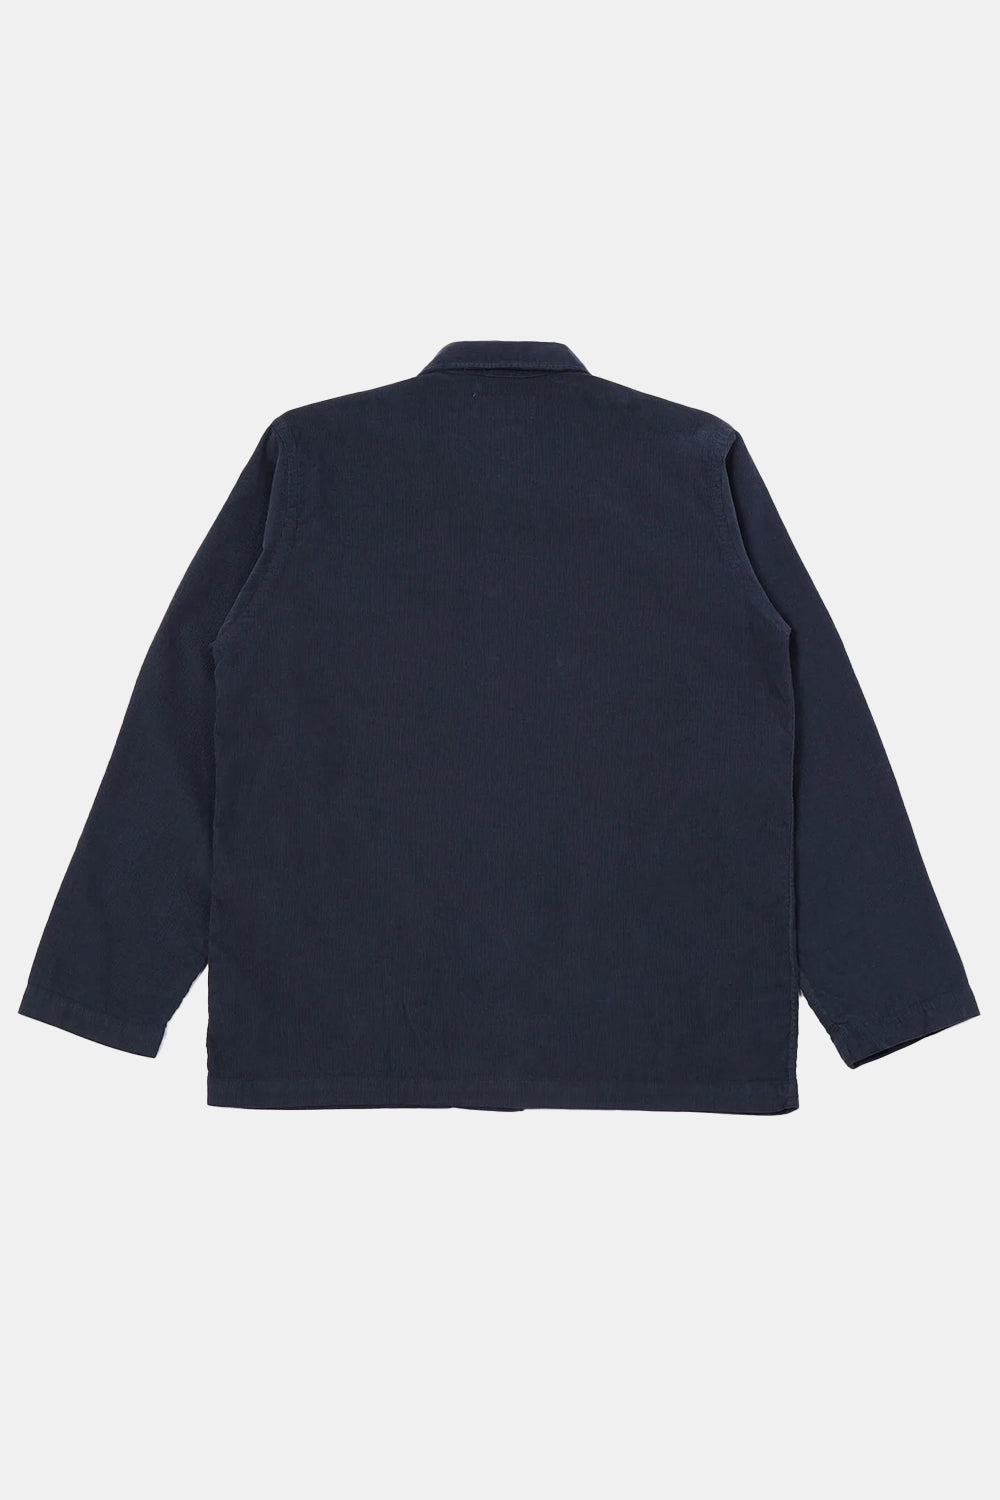 Universal Works Fine Cord Bakers Overshirt (Navy) | Number Six